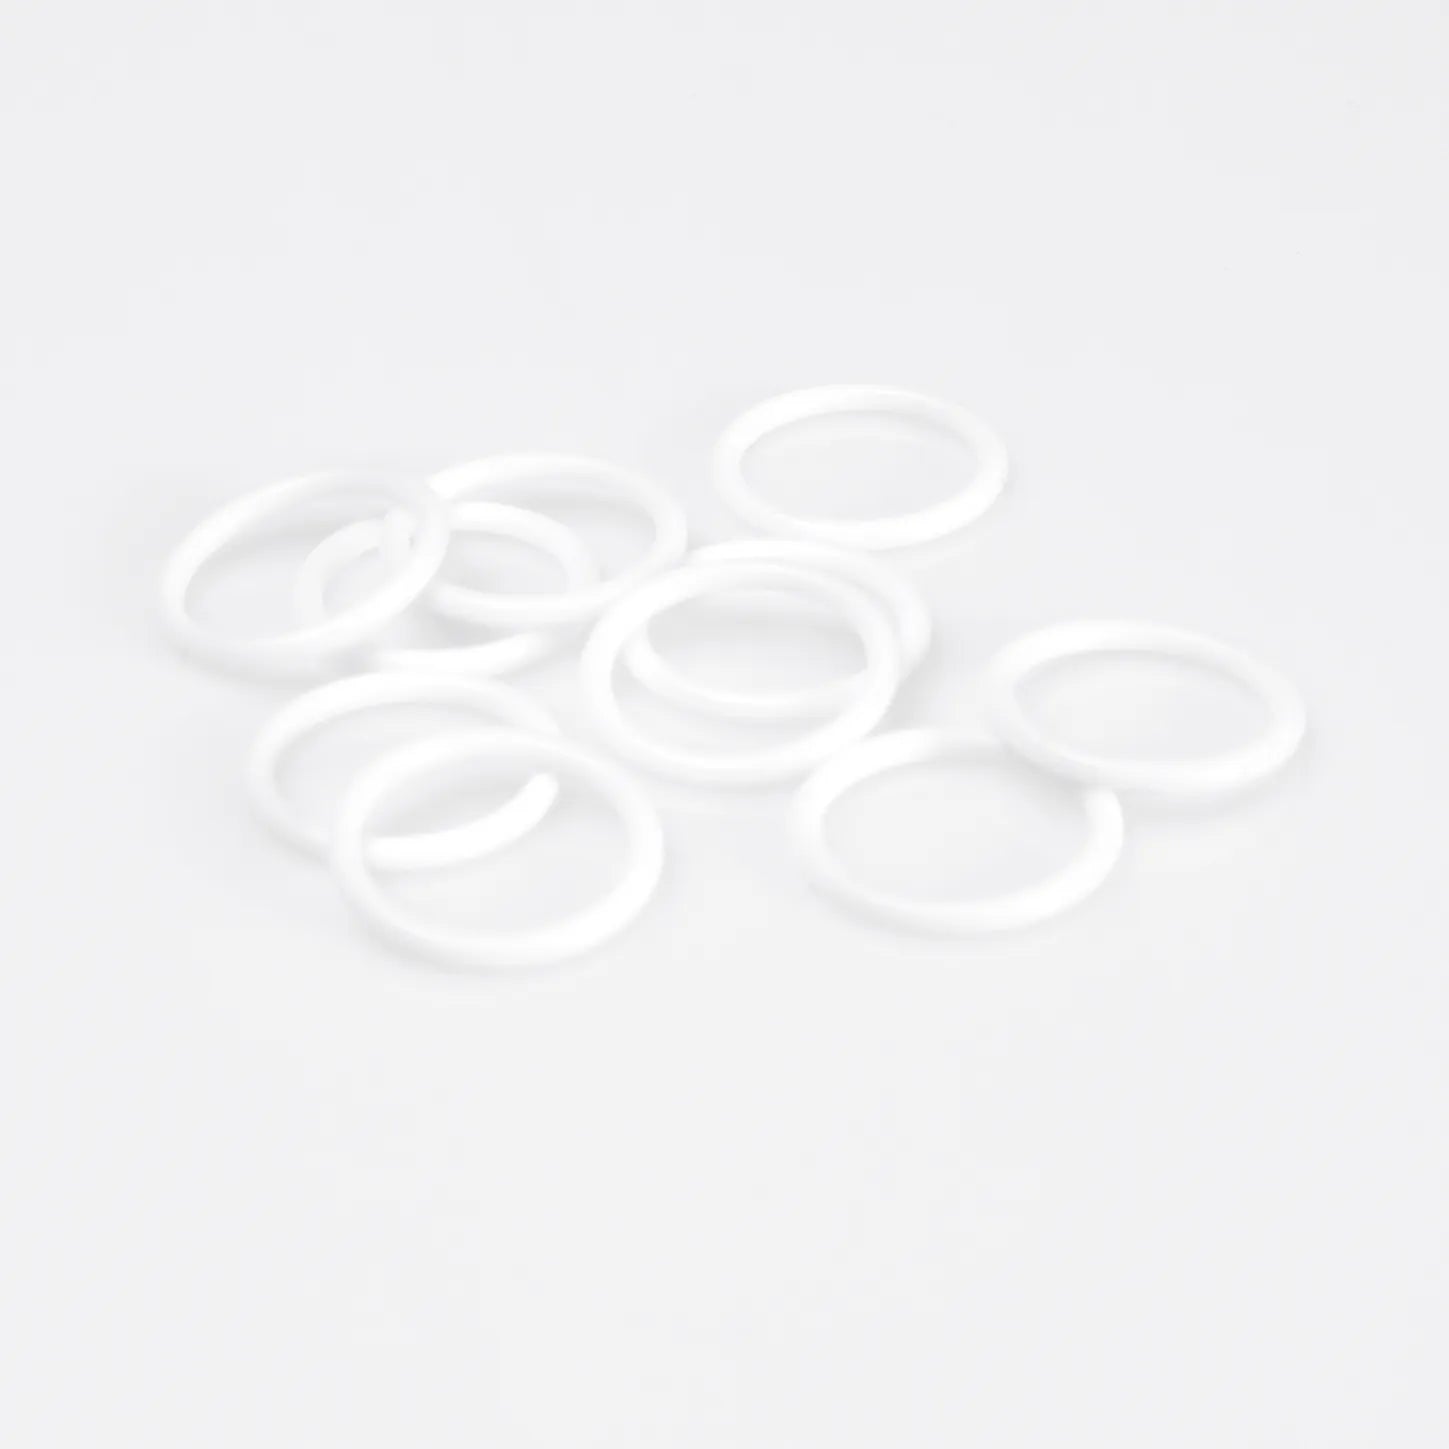 O-Ring, PTFE 10/pk, Comparable to Thermo™/Dionex # 2266.0082